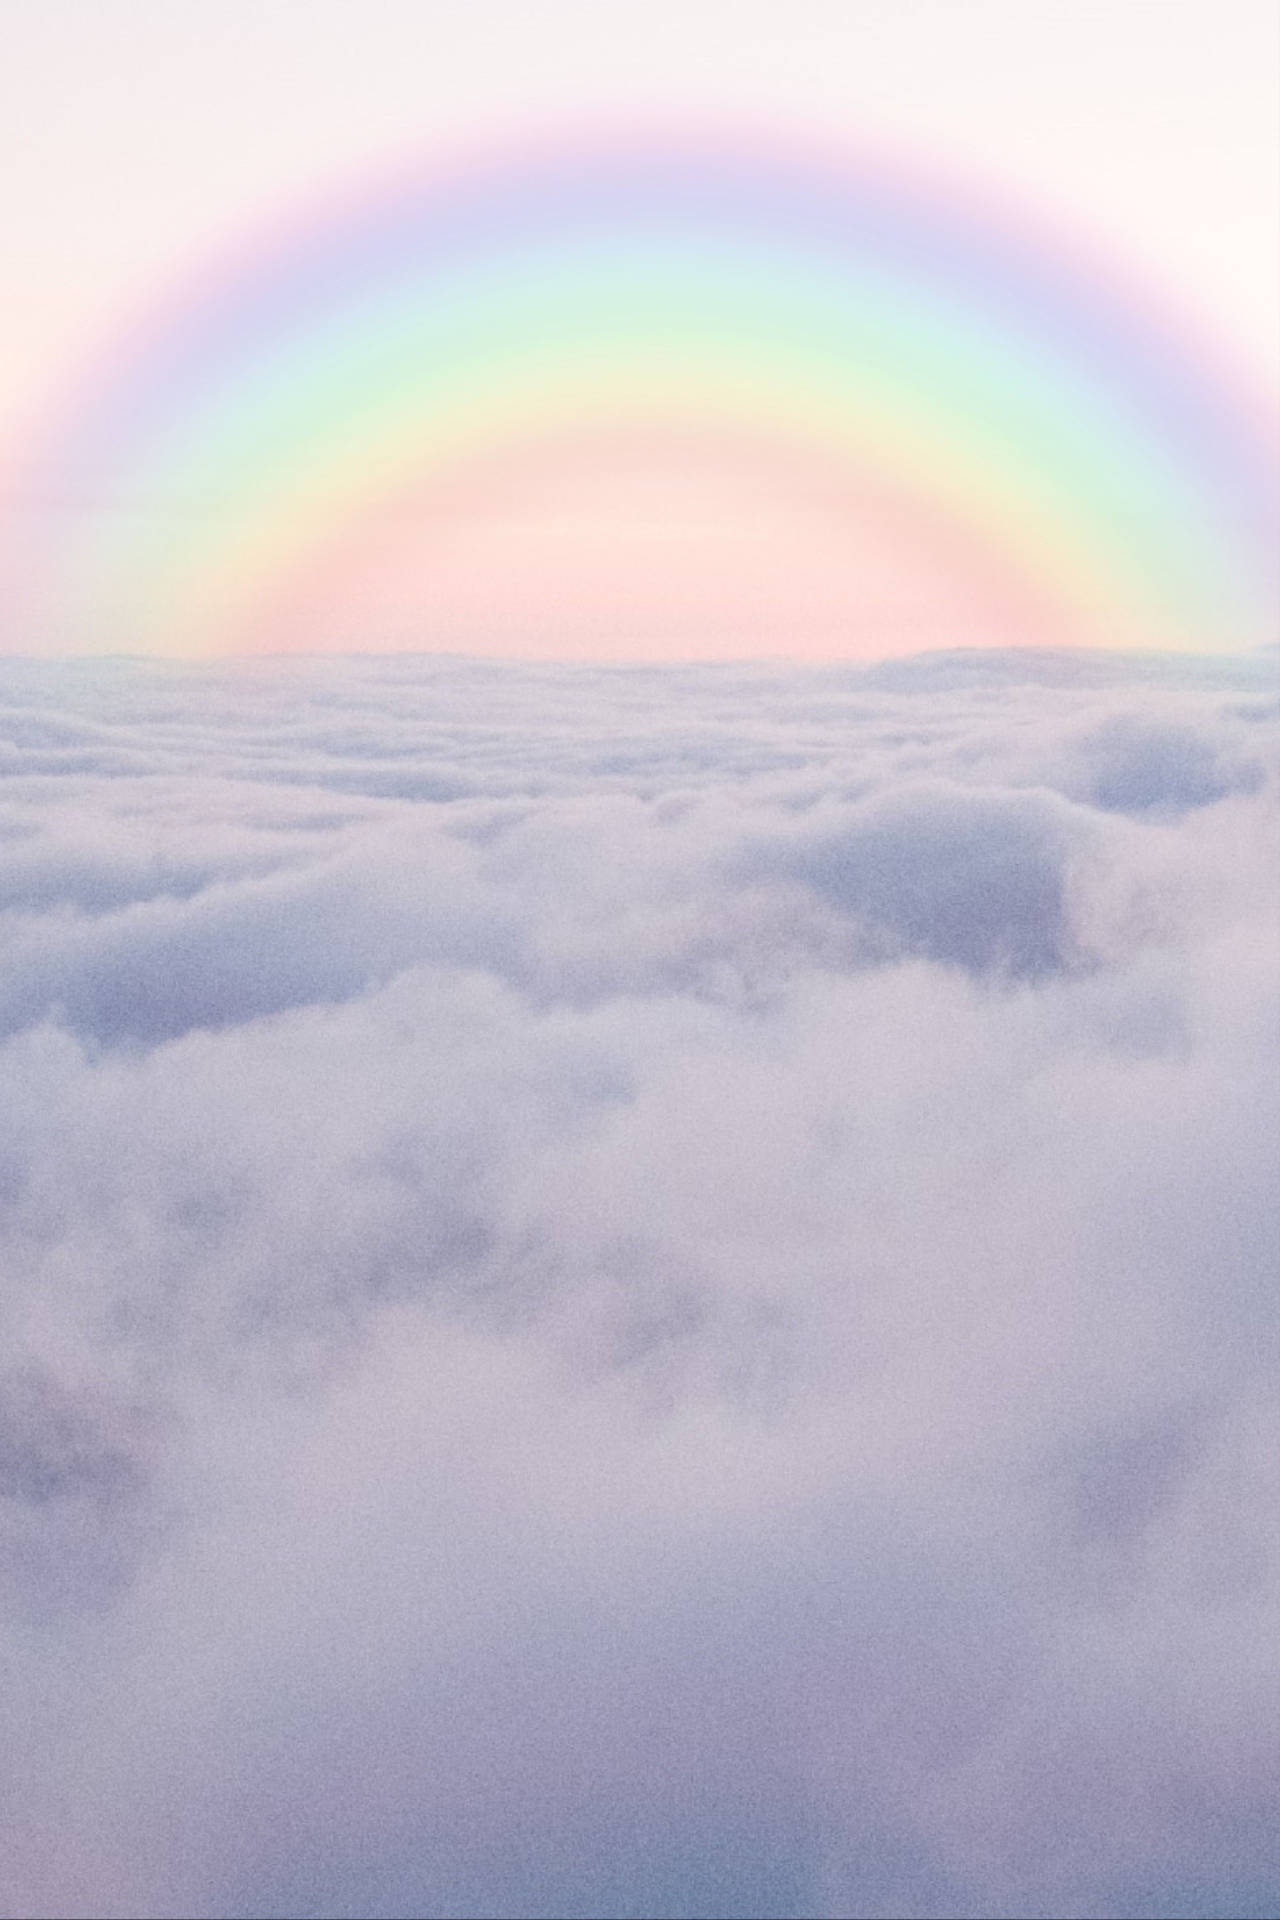 Sea Of Clouds With Pastel Rainbow